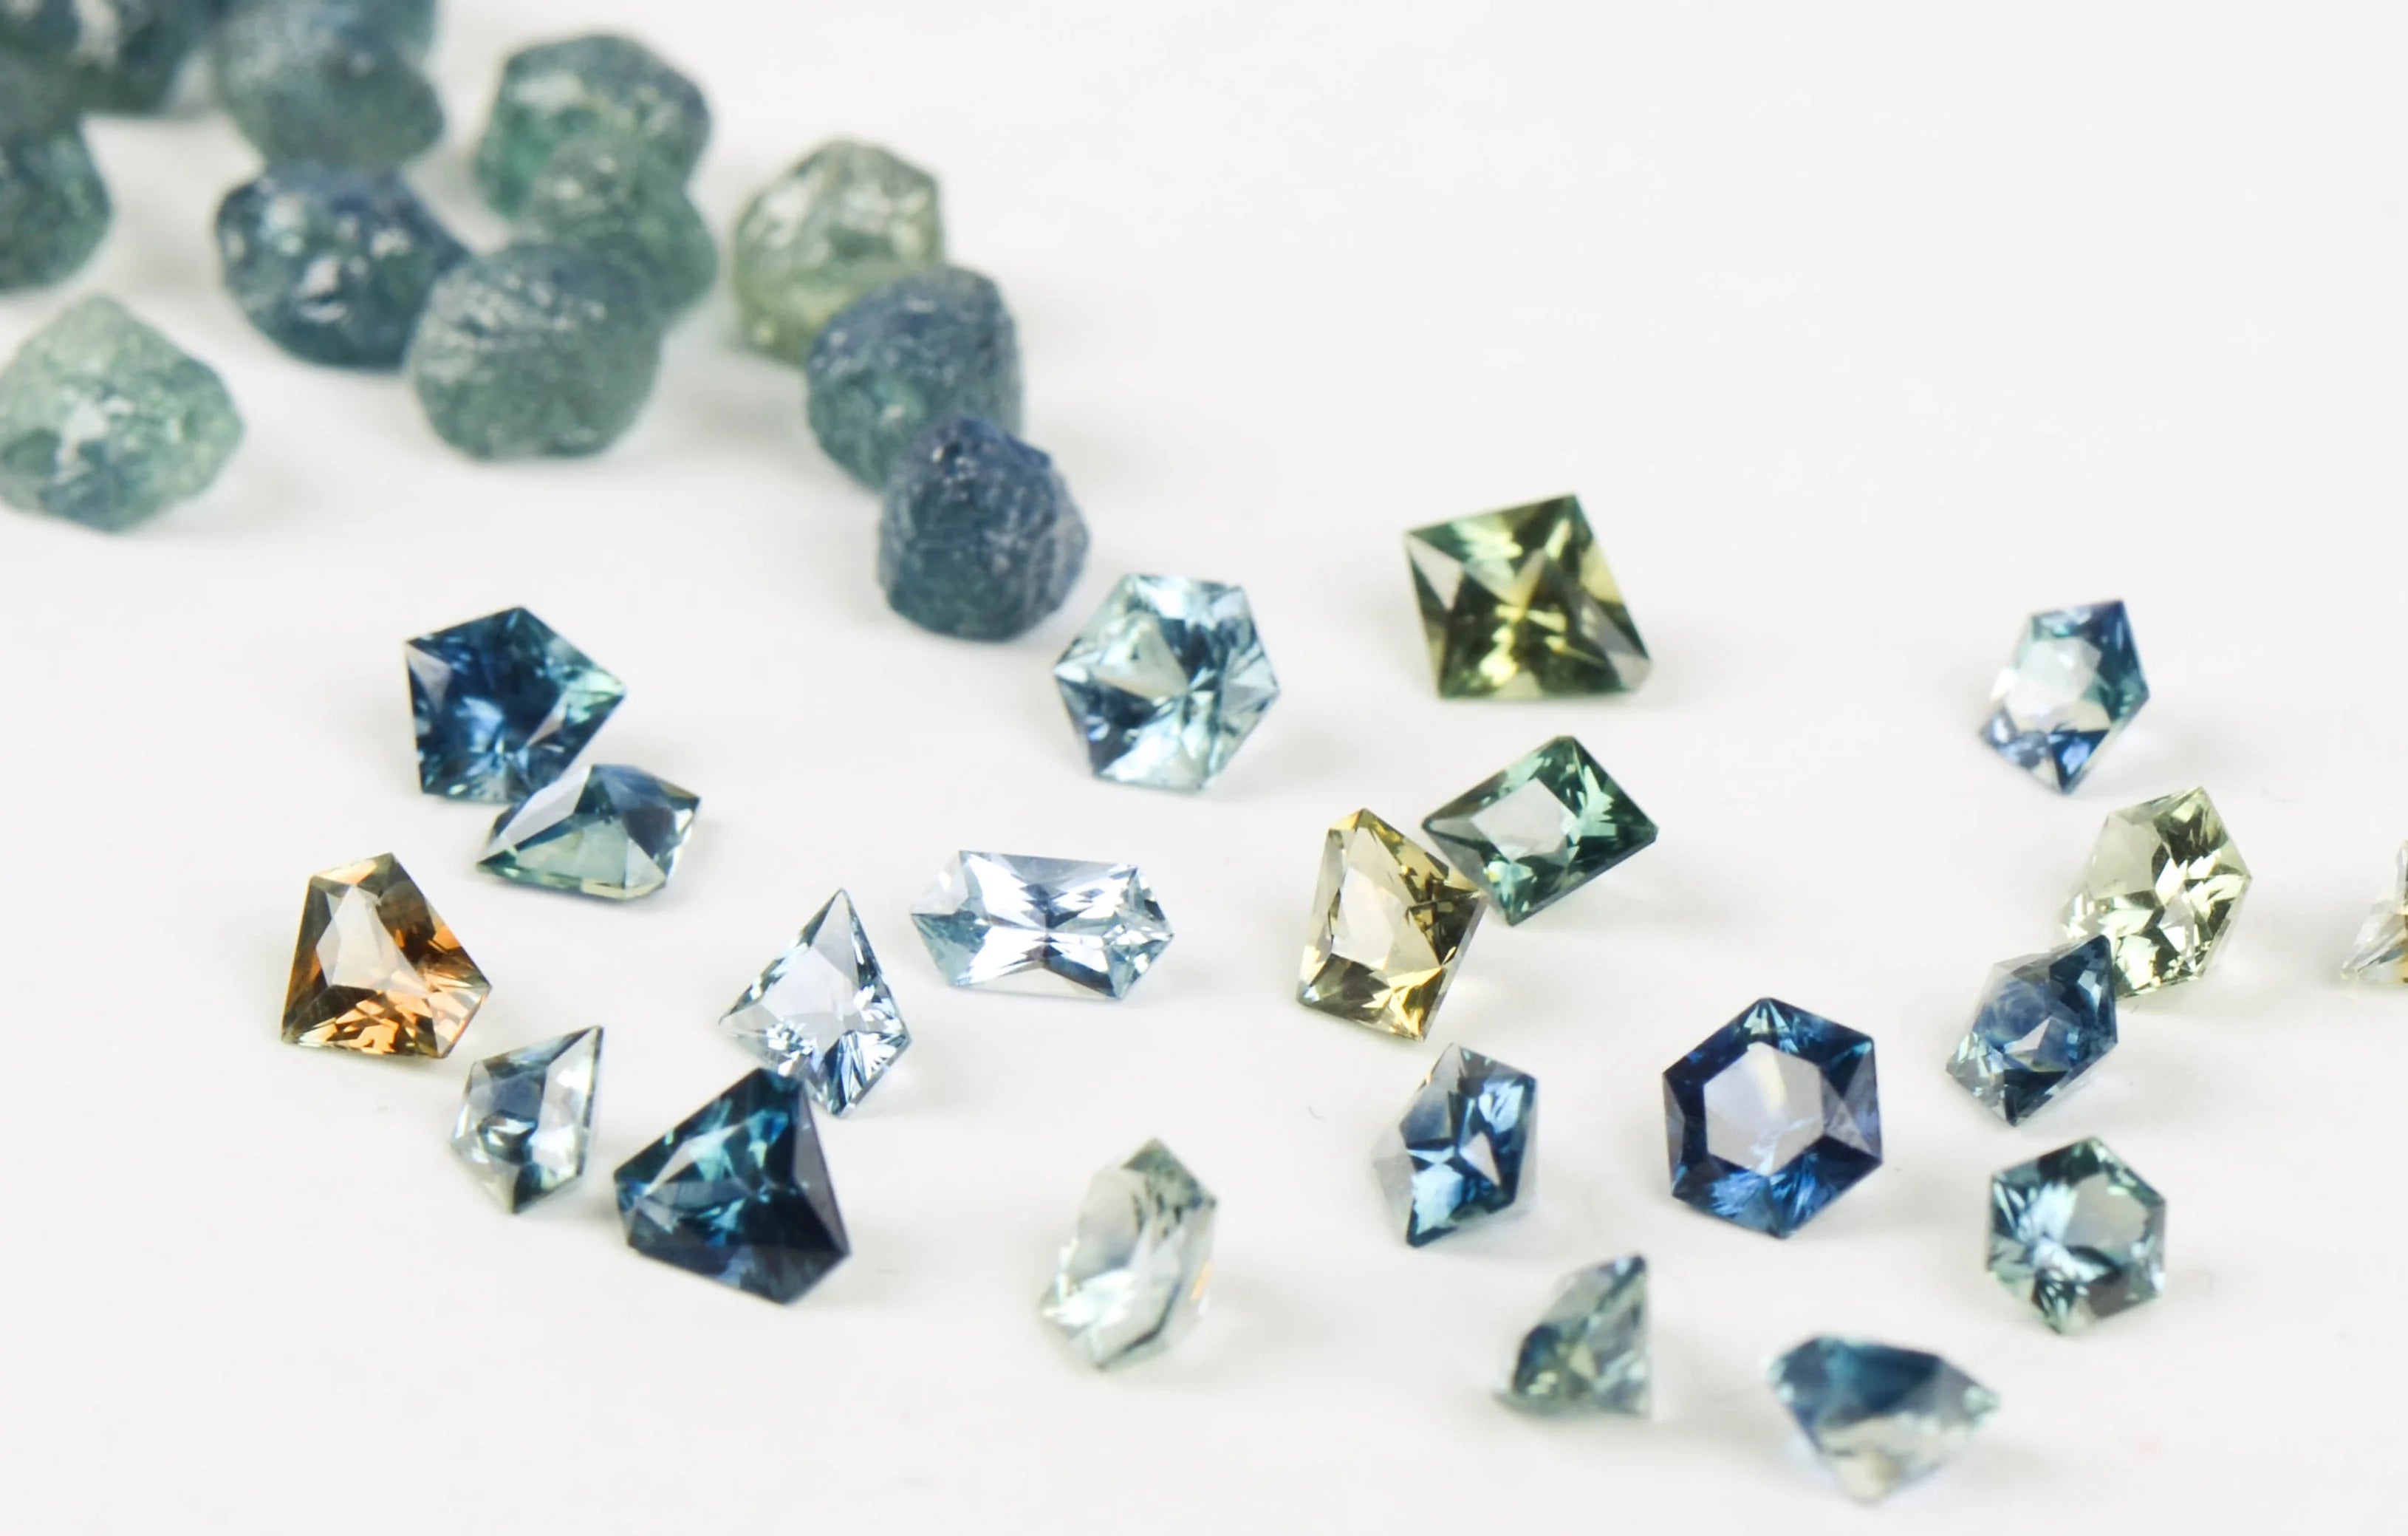 Montana sapphires: famous stones that deserve their glory